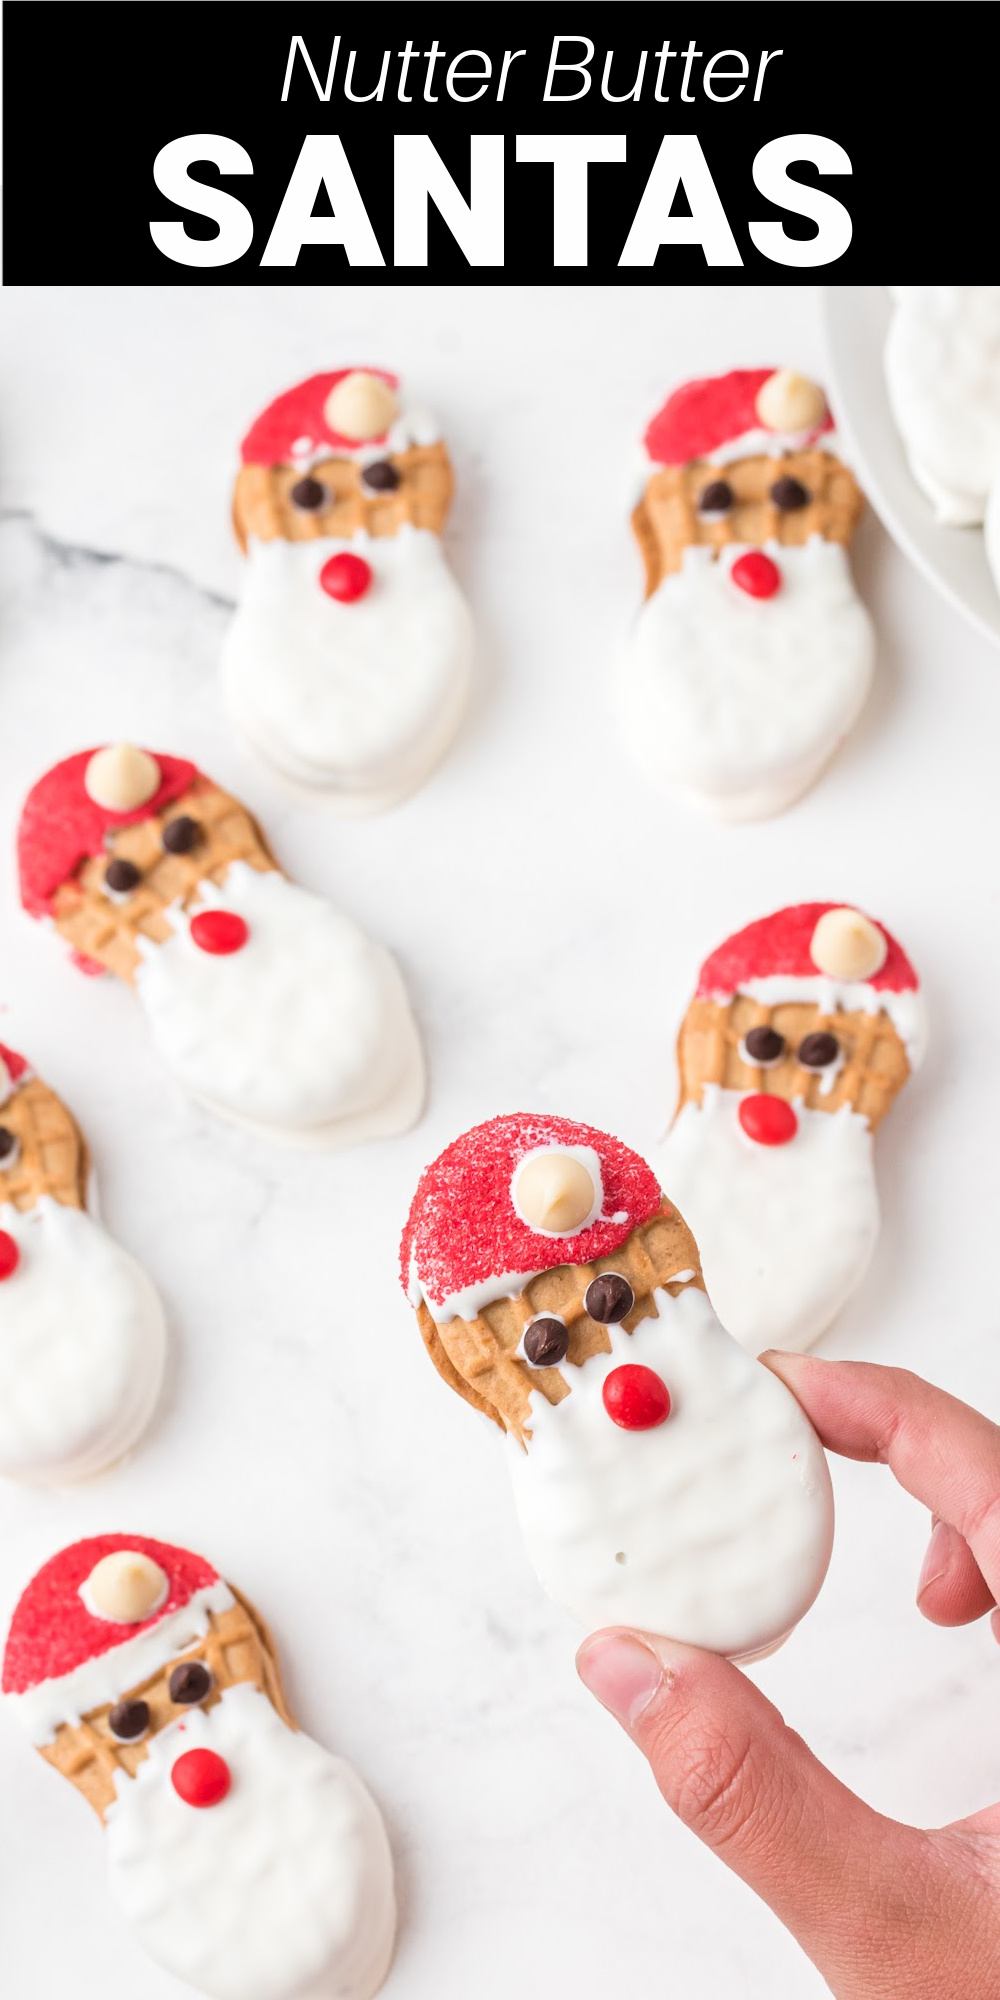 Santa Nutter Butter Cookies are the perfect addition to your Christmas cookie exchange. Peanut nut nutter butter cookies are dipped in chocolate and made to look like Santa! It's a cute treat the kids love!